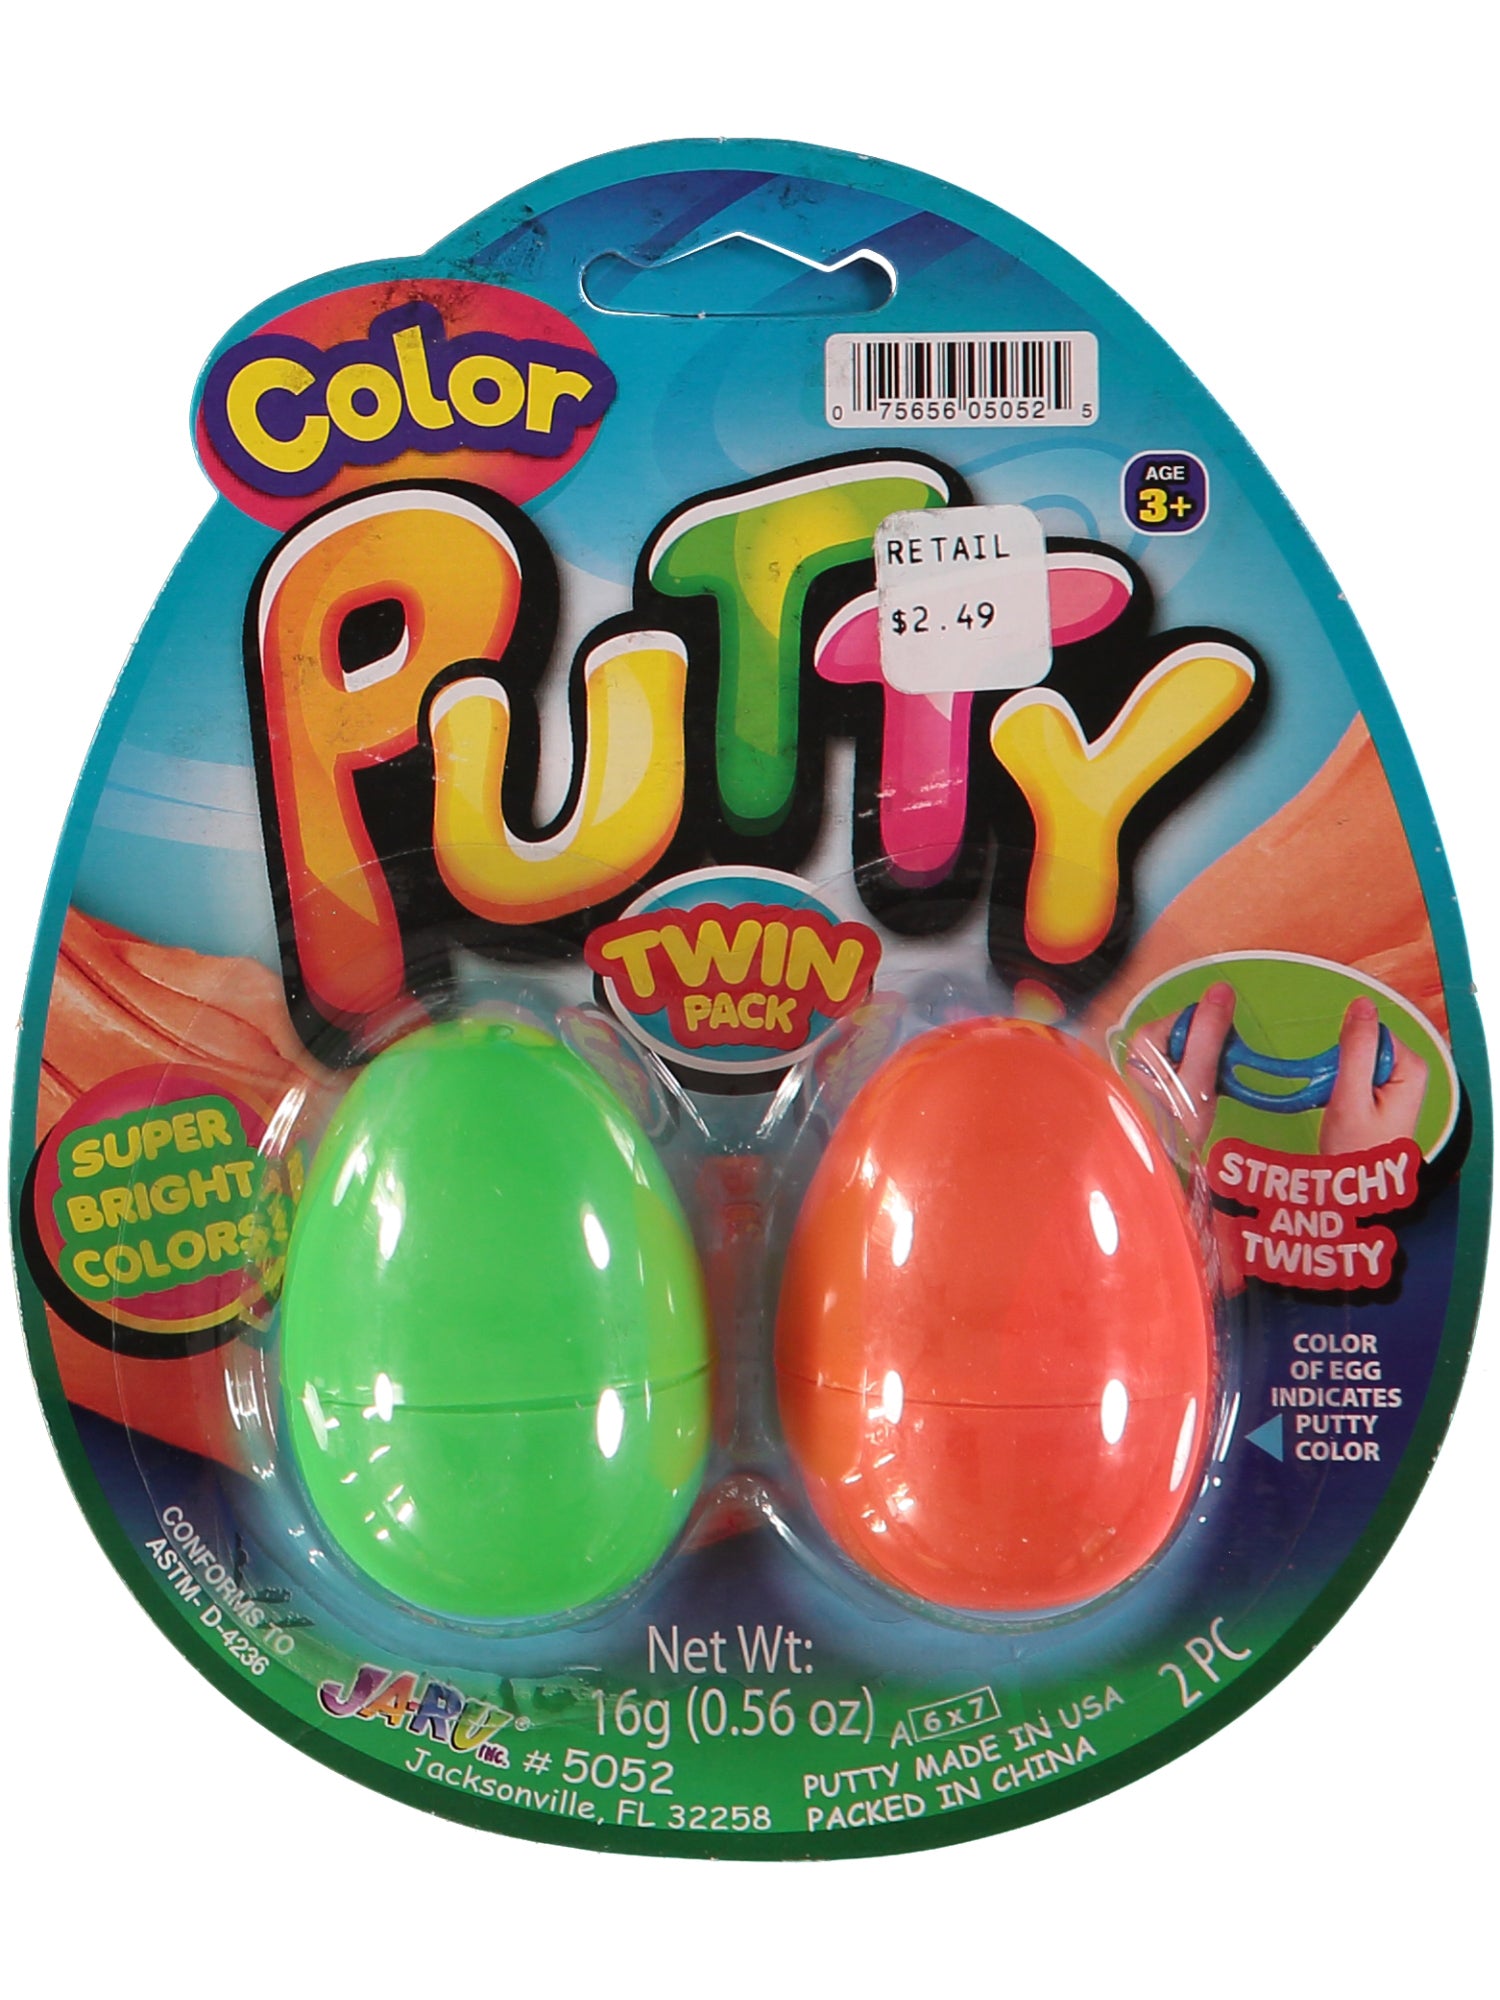 Ja-Ru Silly Putty 2-Pack, Assorted Colors